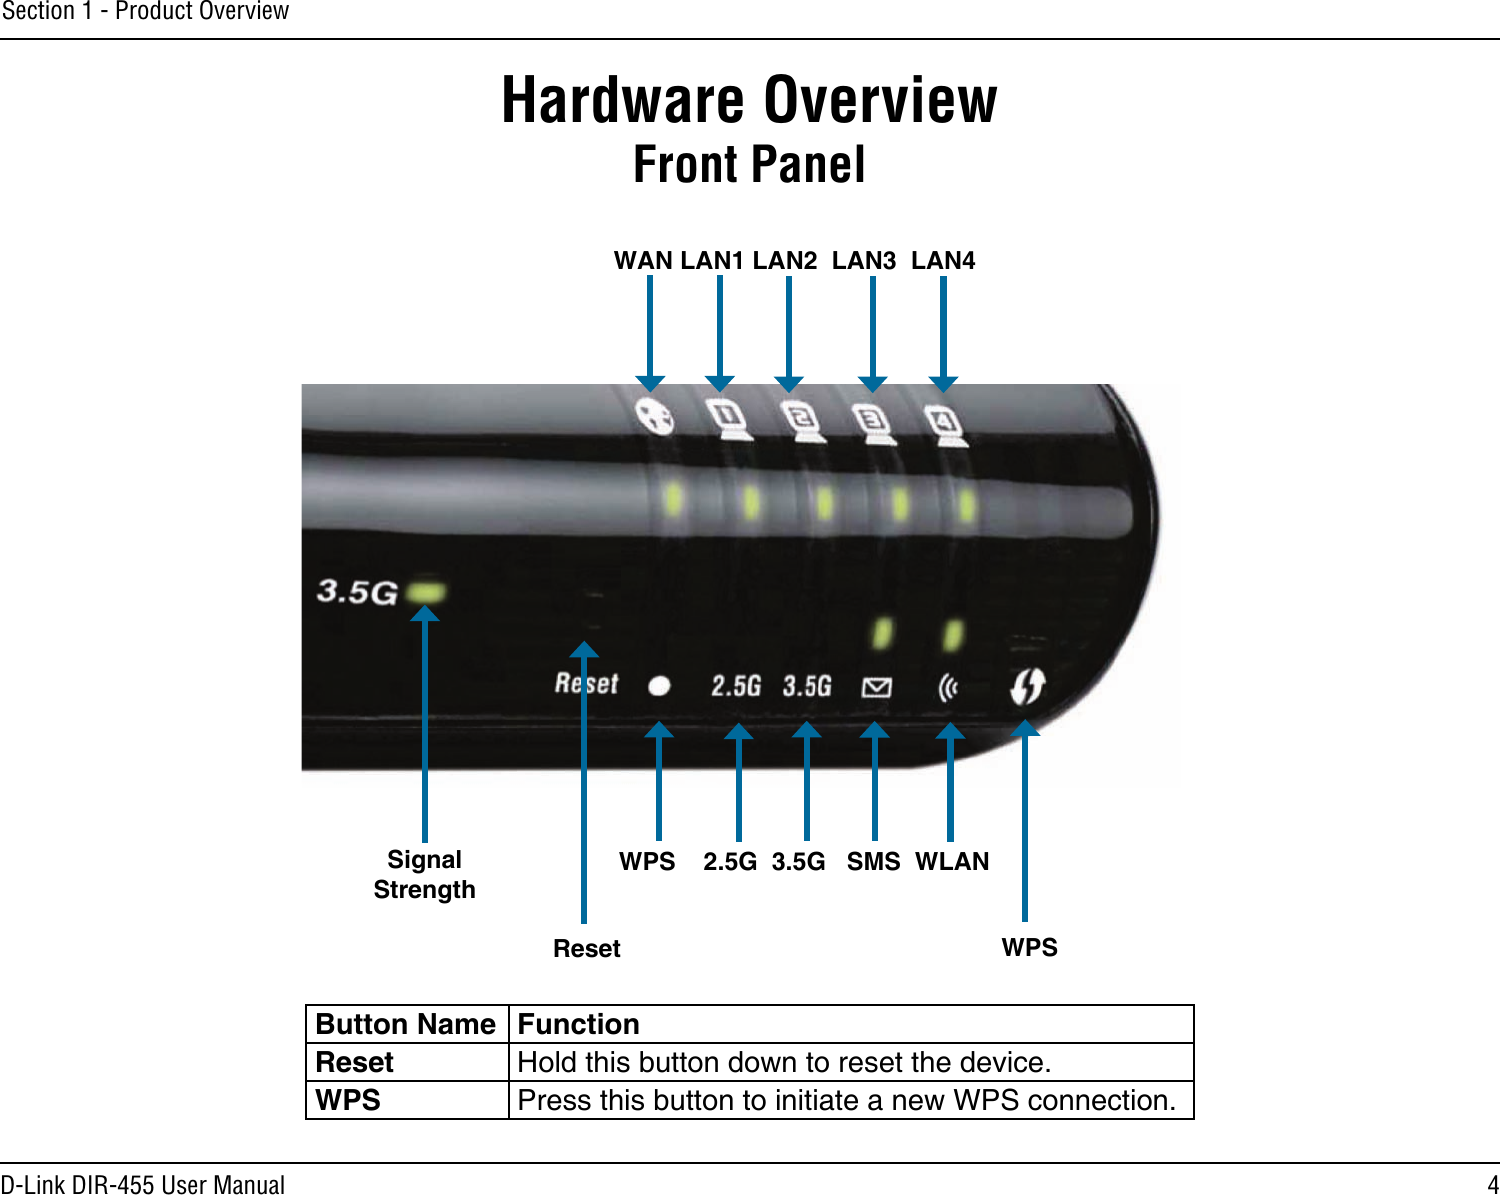 4D-Link DIR-455 User ManualSection 1 - Product OverviewHardware OverviewFront PanelWPS    2.5G  3.5G   SMS  WLAN WAN LAN1 LAN2  LAN3  LAN4SignalStrengthReset   WPSButton Name FunctionReset Hold this button down to reset the device.WPS Press this button to initiate a new WPS connection.